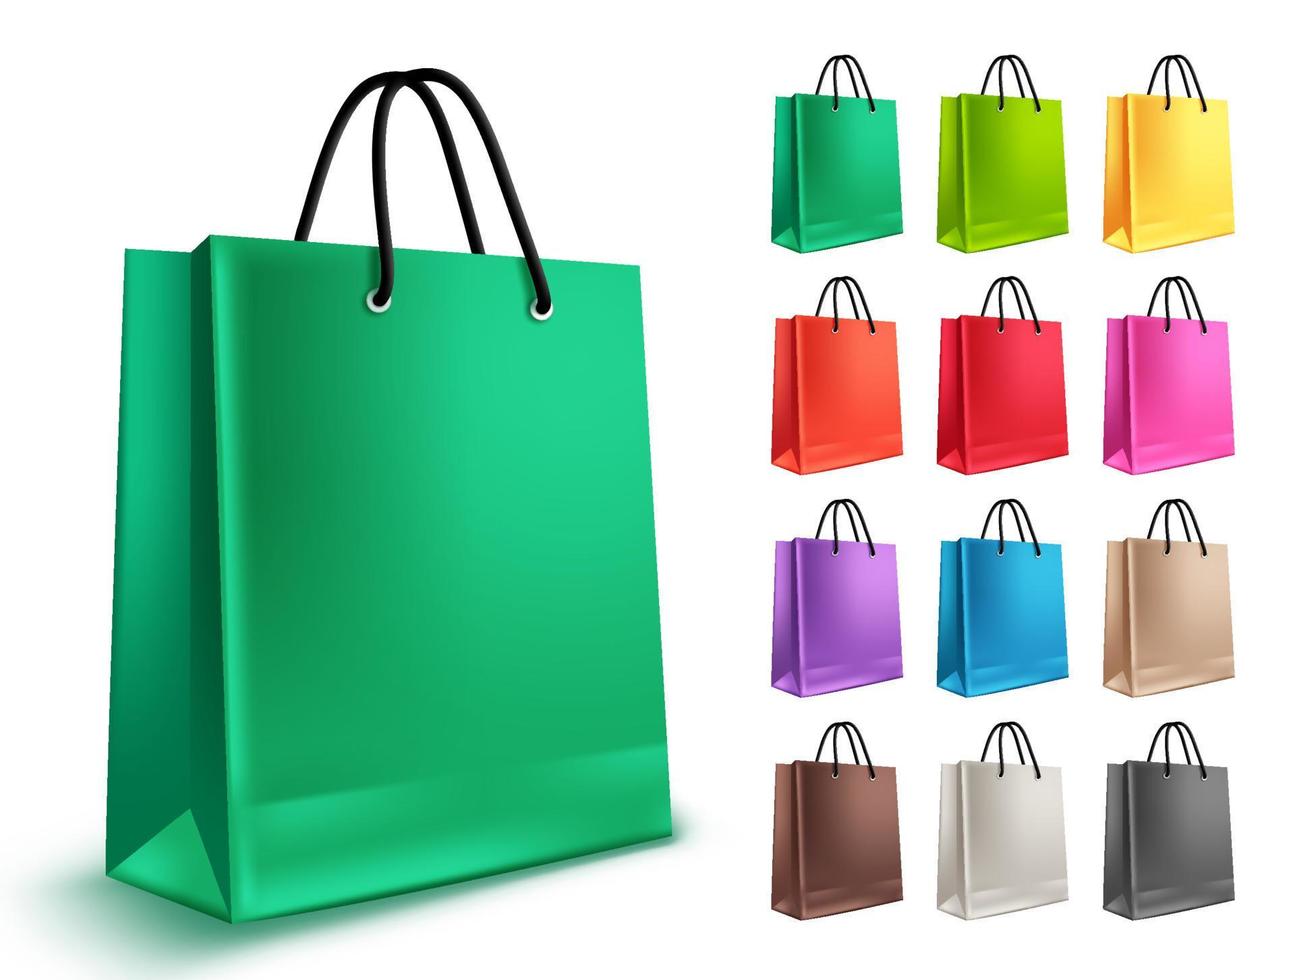 Shopping bags vector set. Empty paper bags with green and other colors isolated in white for shopping and market design elements. Vector illustration.